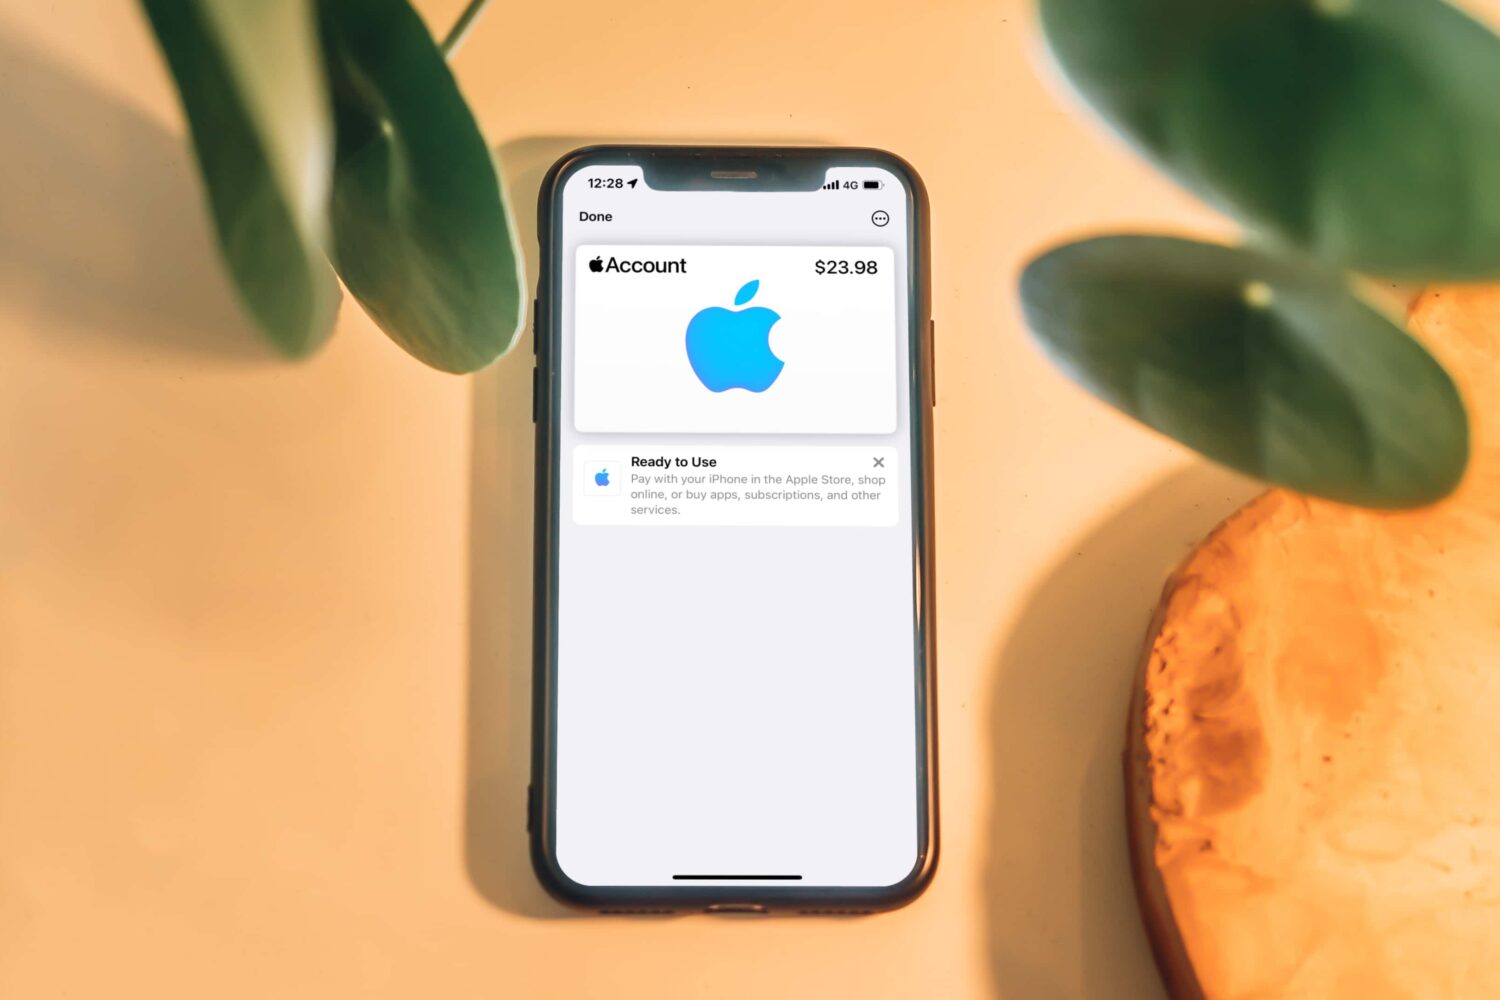 This mockup depicts an iPhone which is laid flat on a table, running the Wallet app. A banner in Wallet confirms that an Apple Account card has been successfully added to Apple Pay. The message informs the user they can use this virtual card when buying physical products at Apple stores, as well as apps, media and subscriptions online.